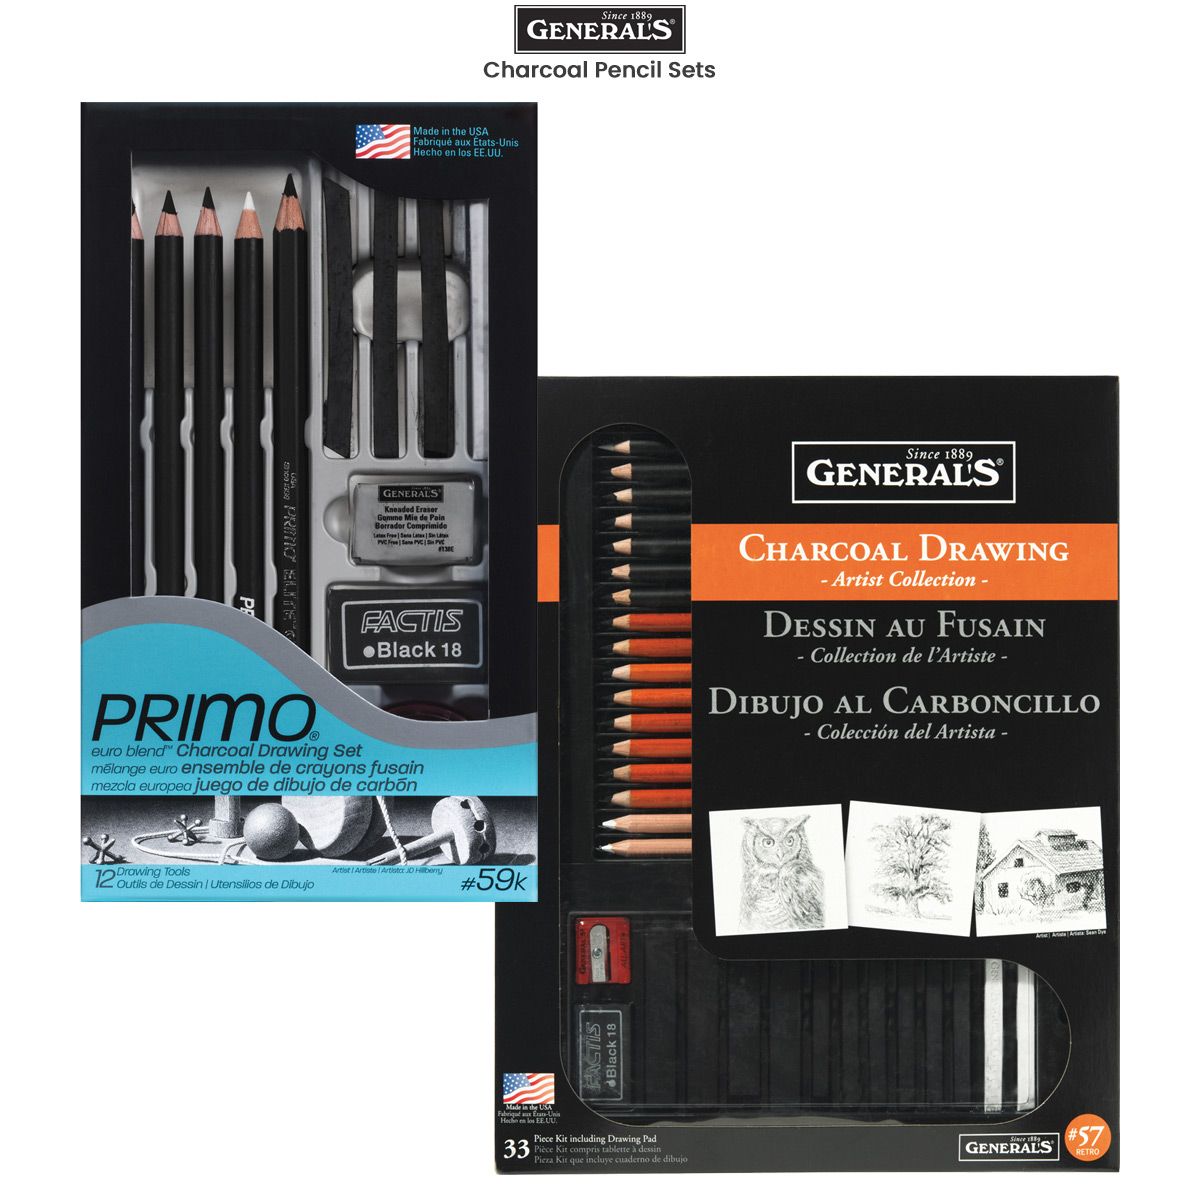 General's Compressed Charcoal Packs